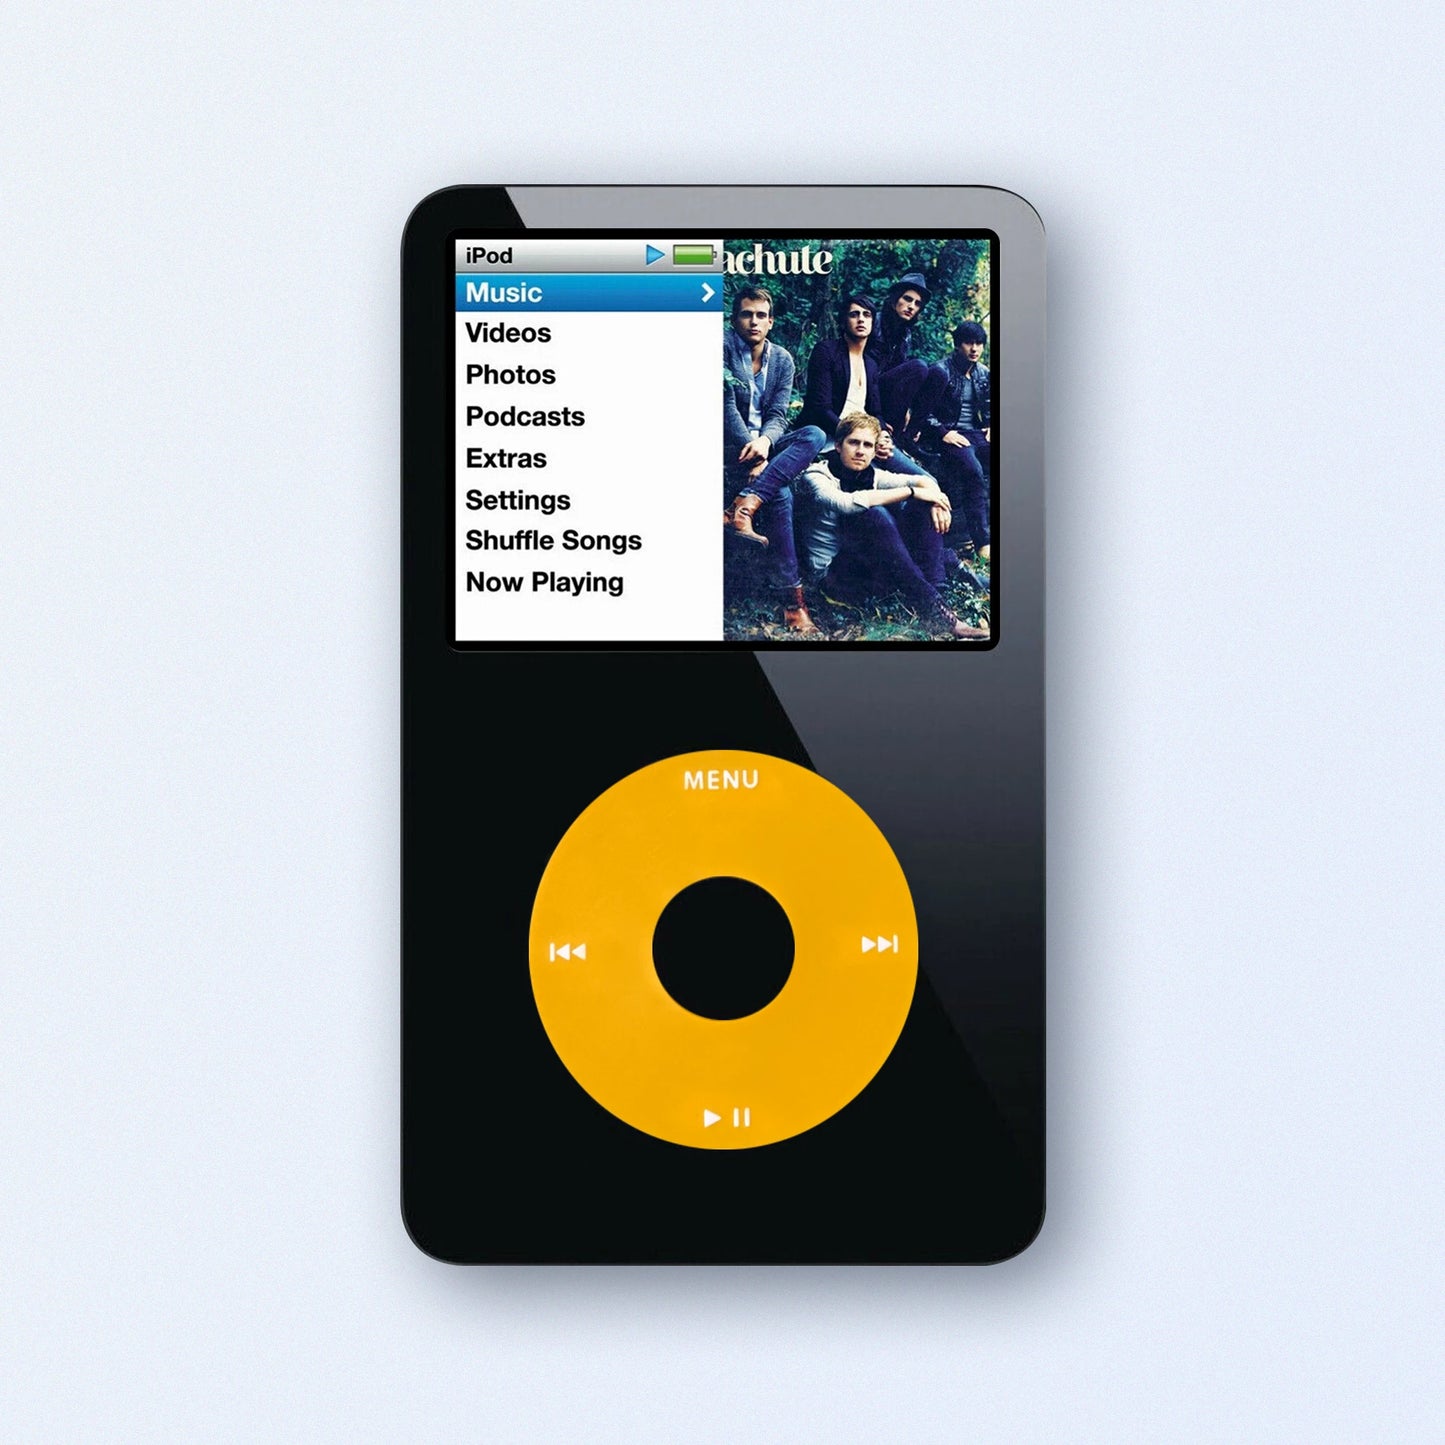 Black Apple iPod Classic Black 5th Generation upgraded with SDXC Card